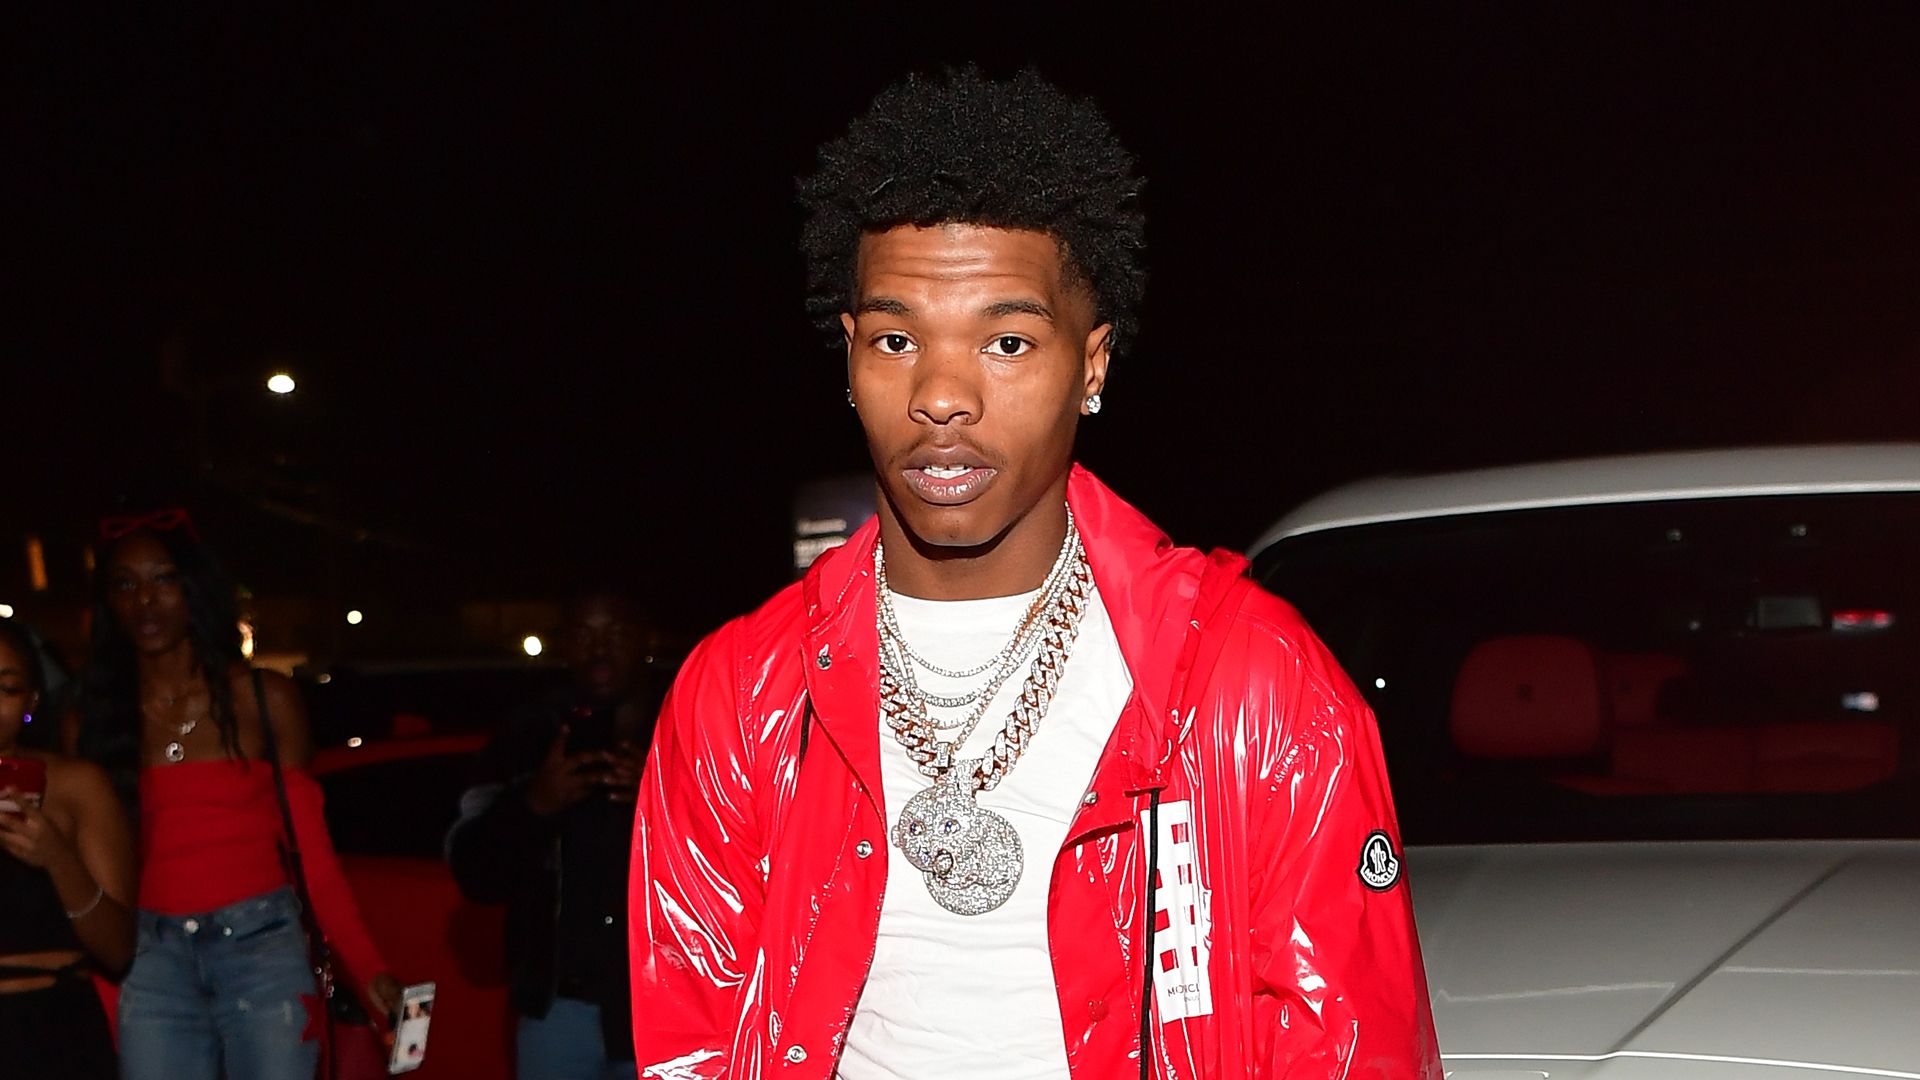 Lil Baby Arrested, Accused of Reckless Driving in a Corvette